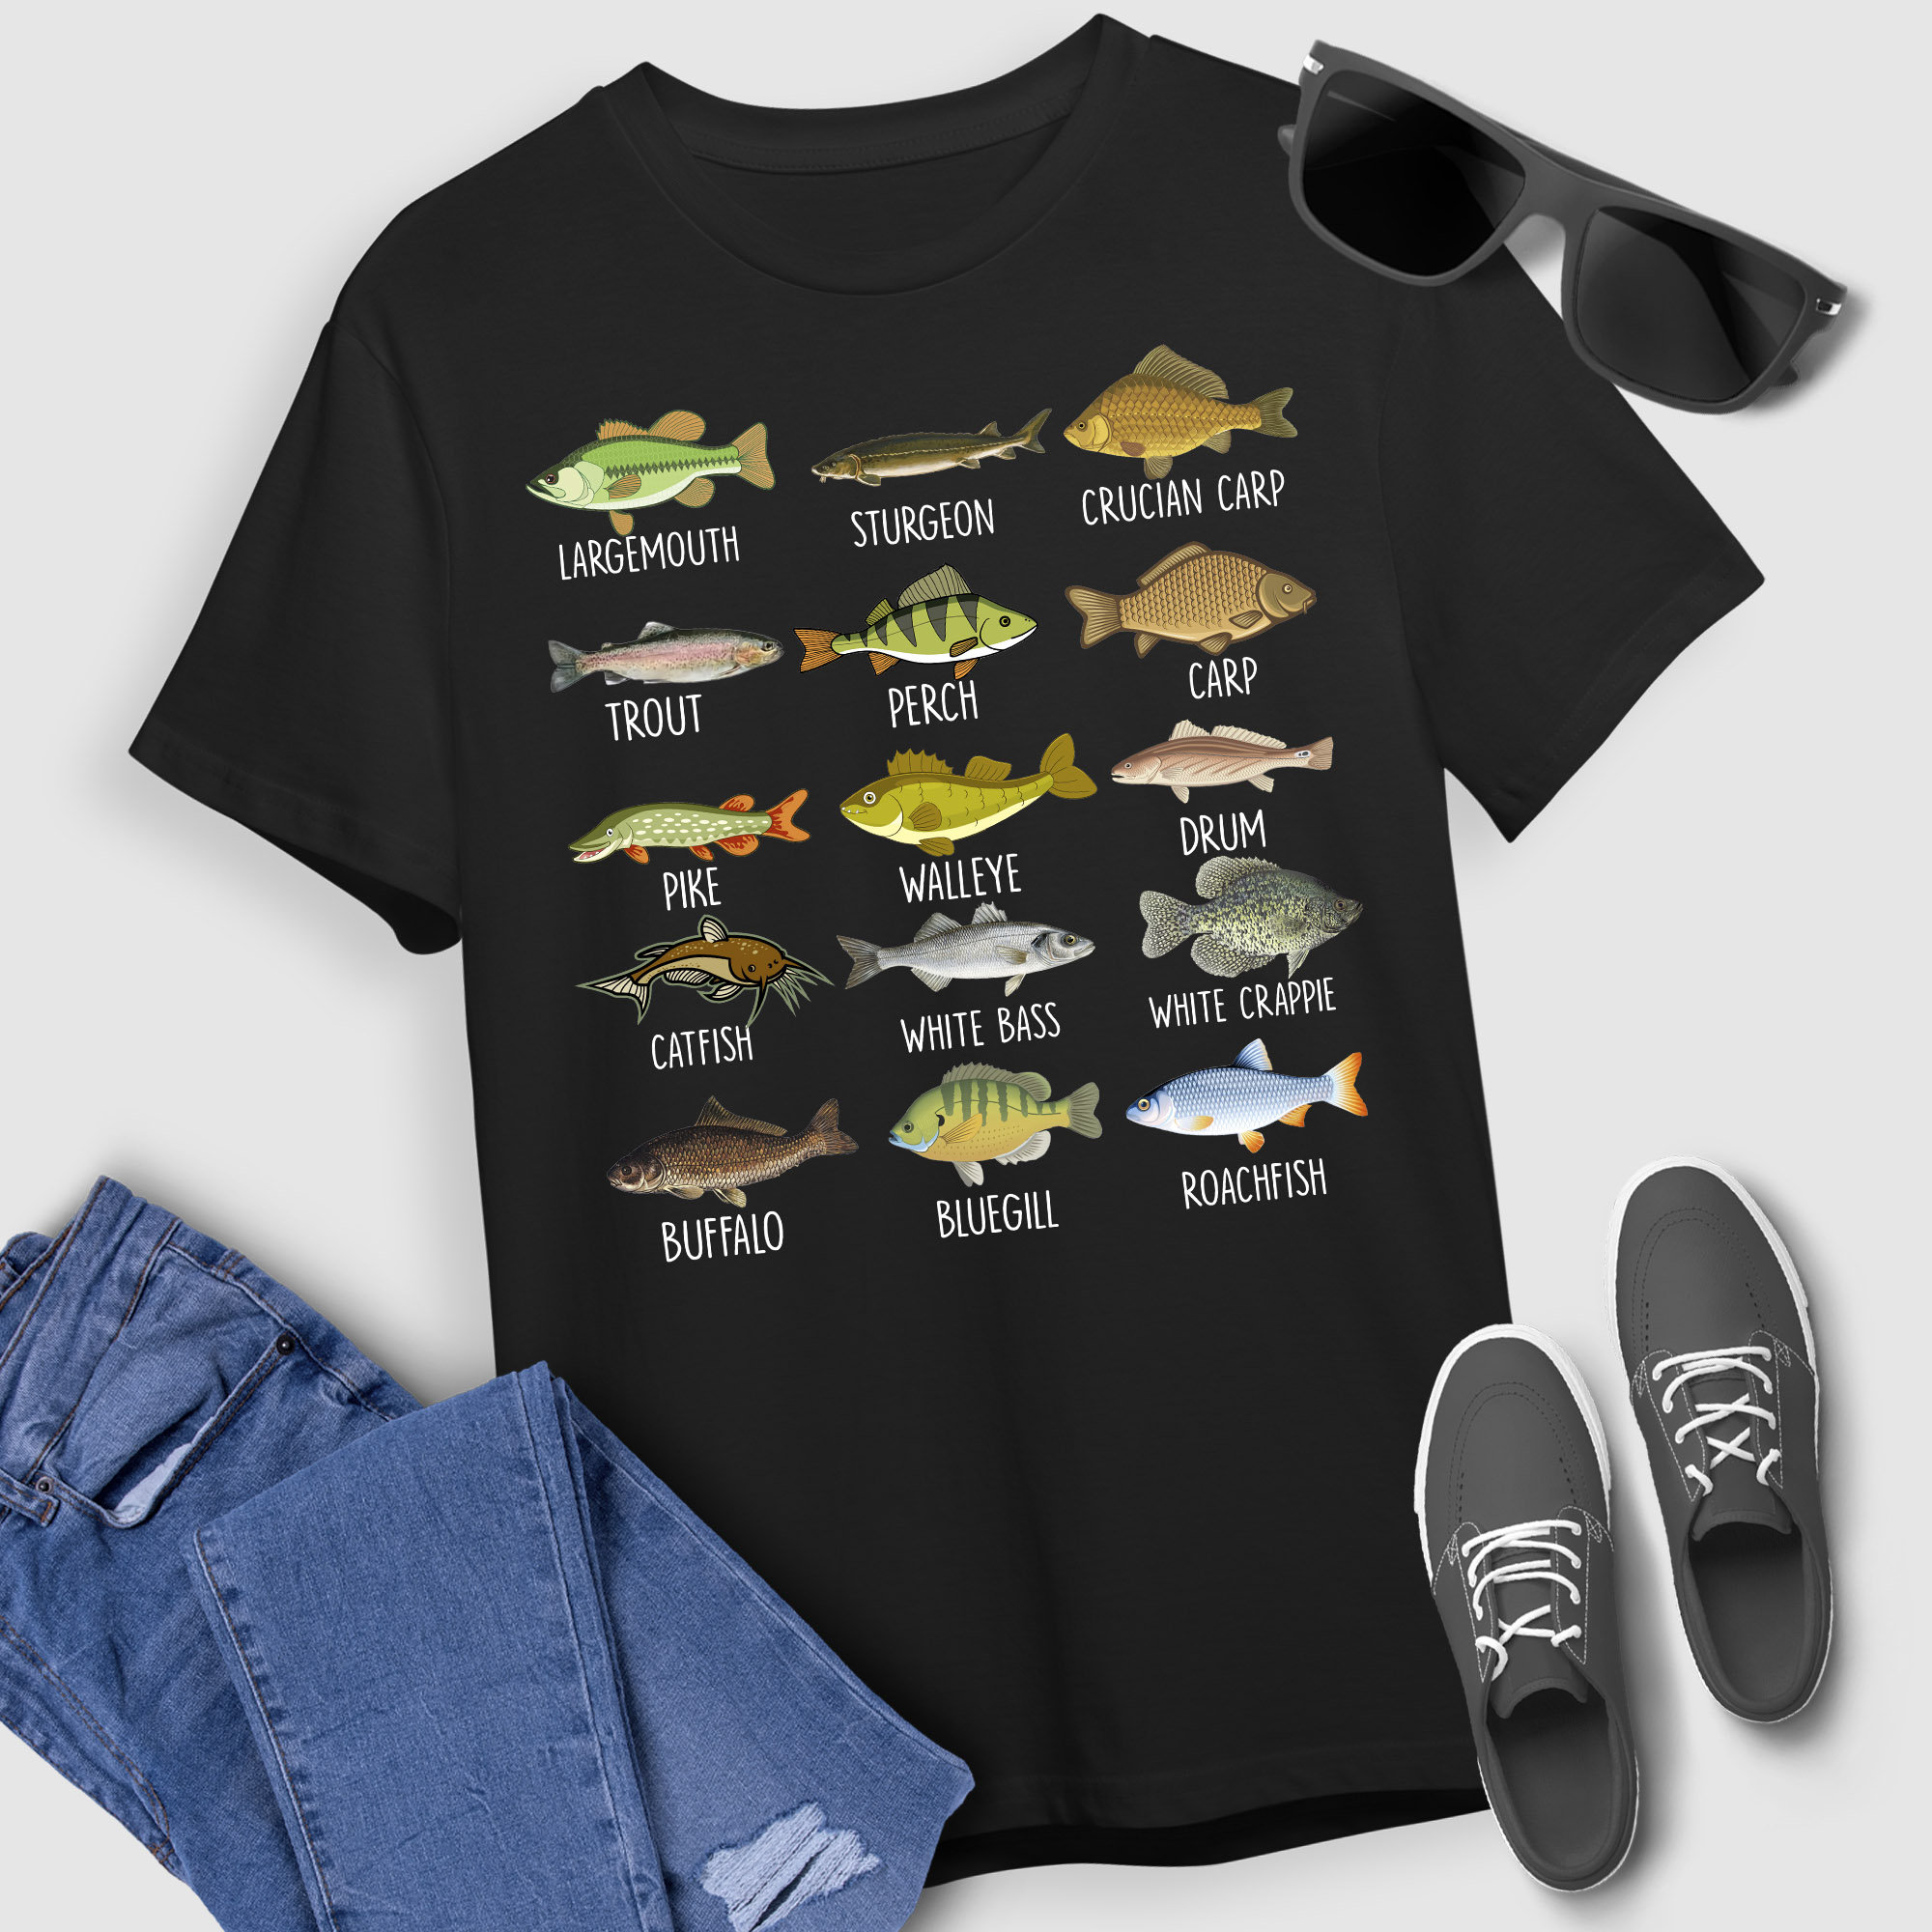 Types of Fish T-shirt Types of Freshwater Fish Species Fishing T